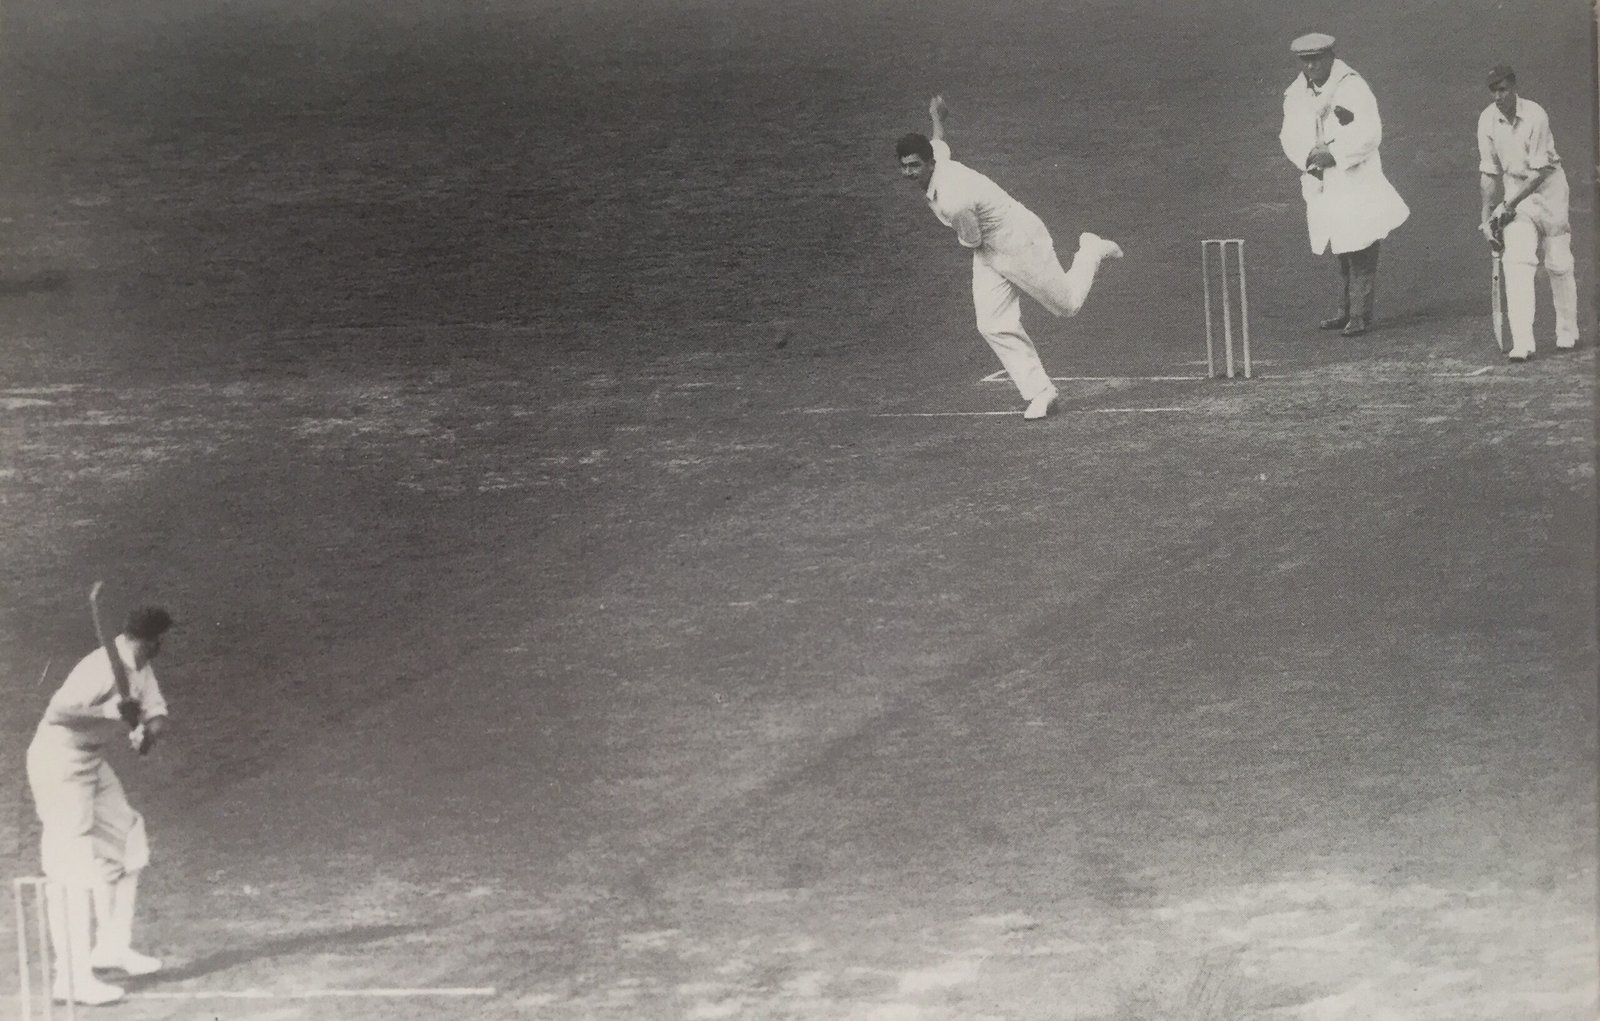 Bill Voce was yards slower than his strike partner Harold Larwood, but his line and the bounce his height enabled to him to extract meant that batsmen, like the non-striker in this one, were in no hurry to face him